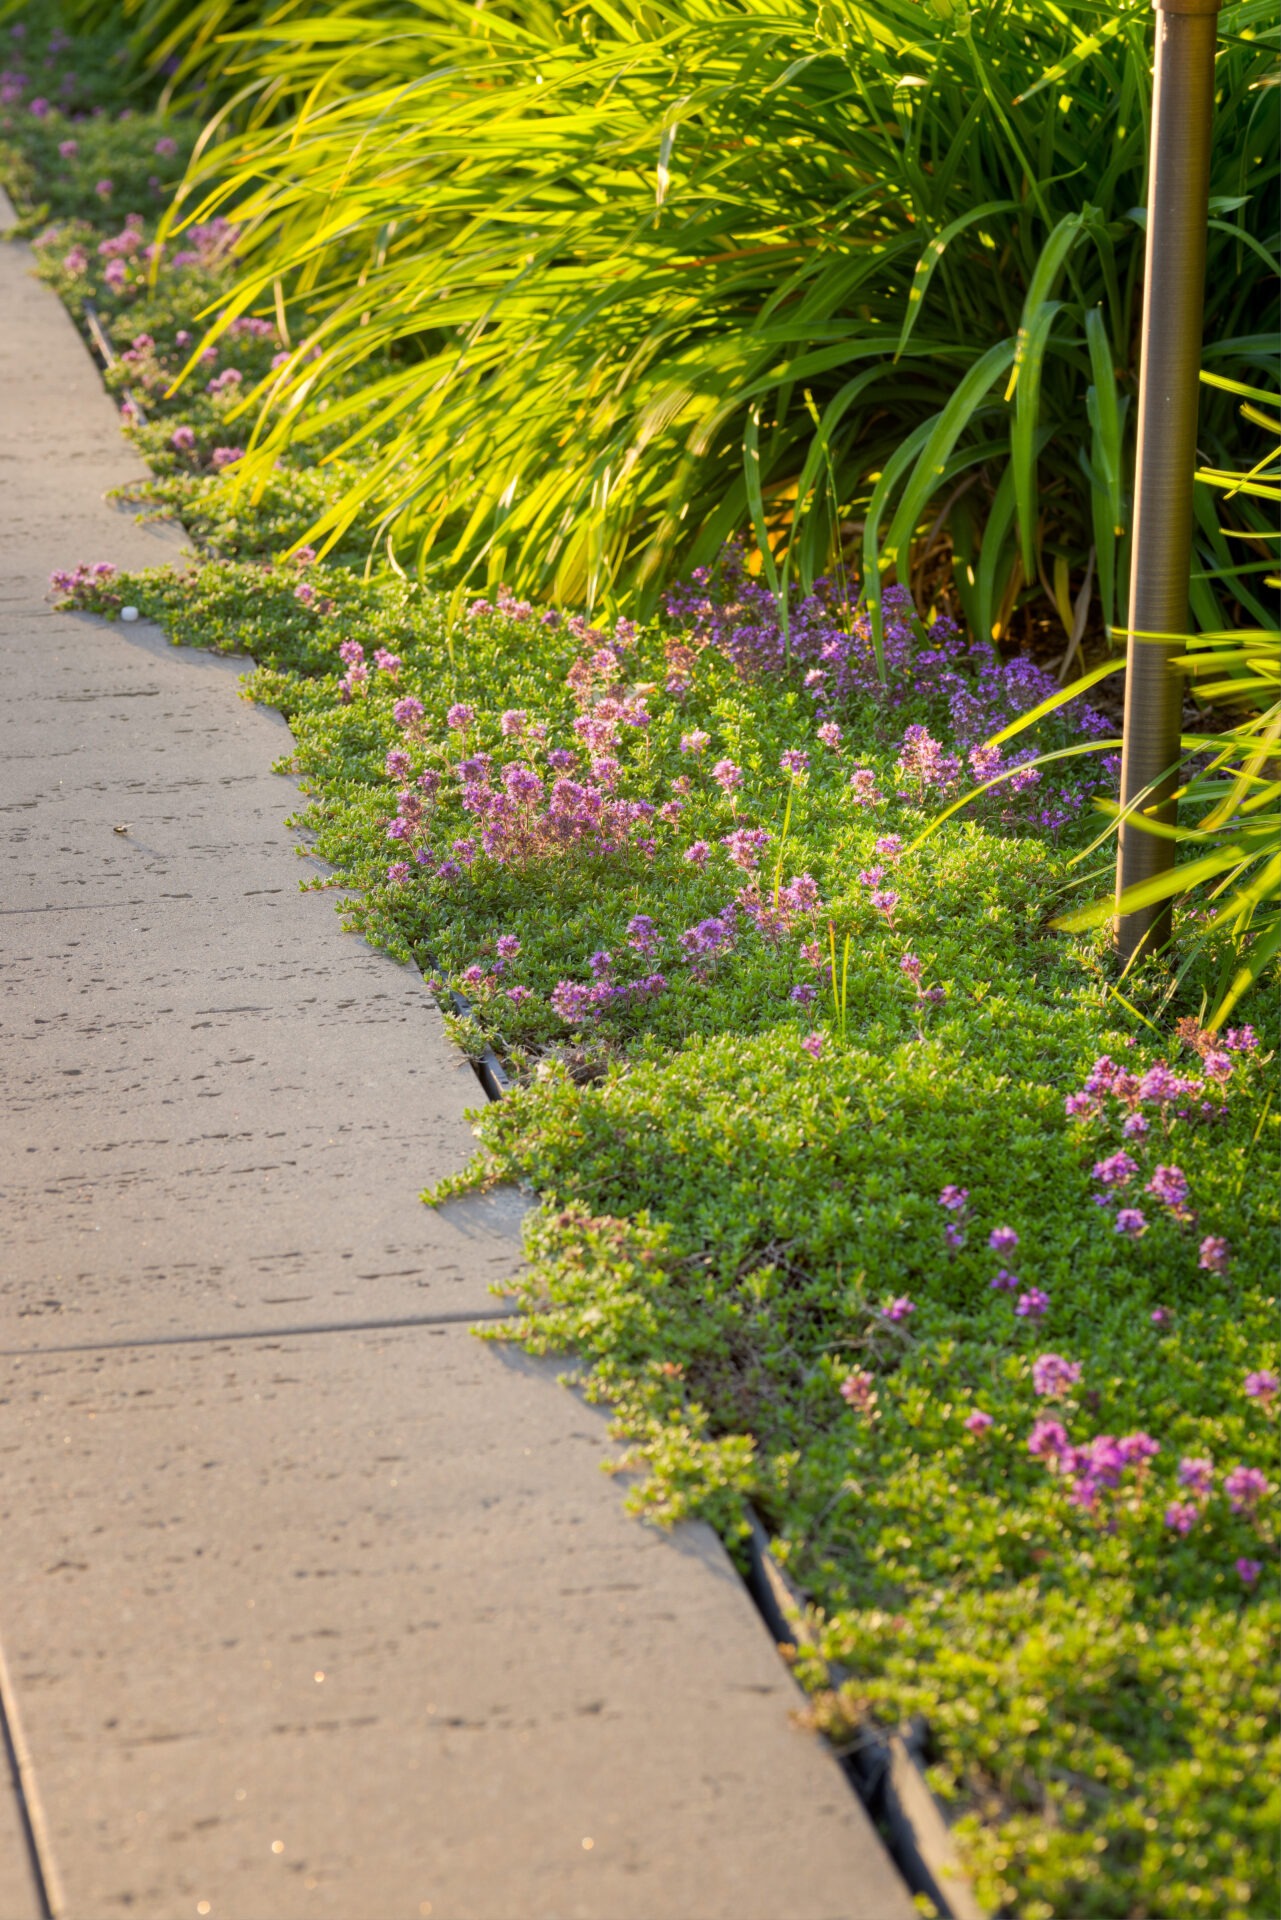 A winding concrete pathway is bordered by vibrant purple flowers and lush green grasses, illuminated by warm sunlight, suggesting a tranquil garden setting.